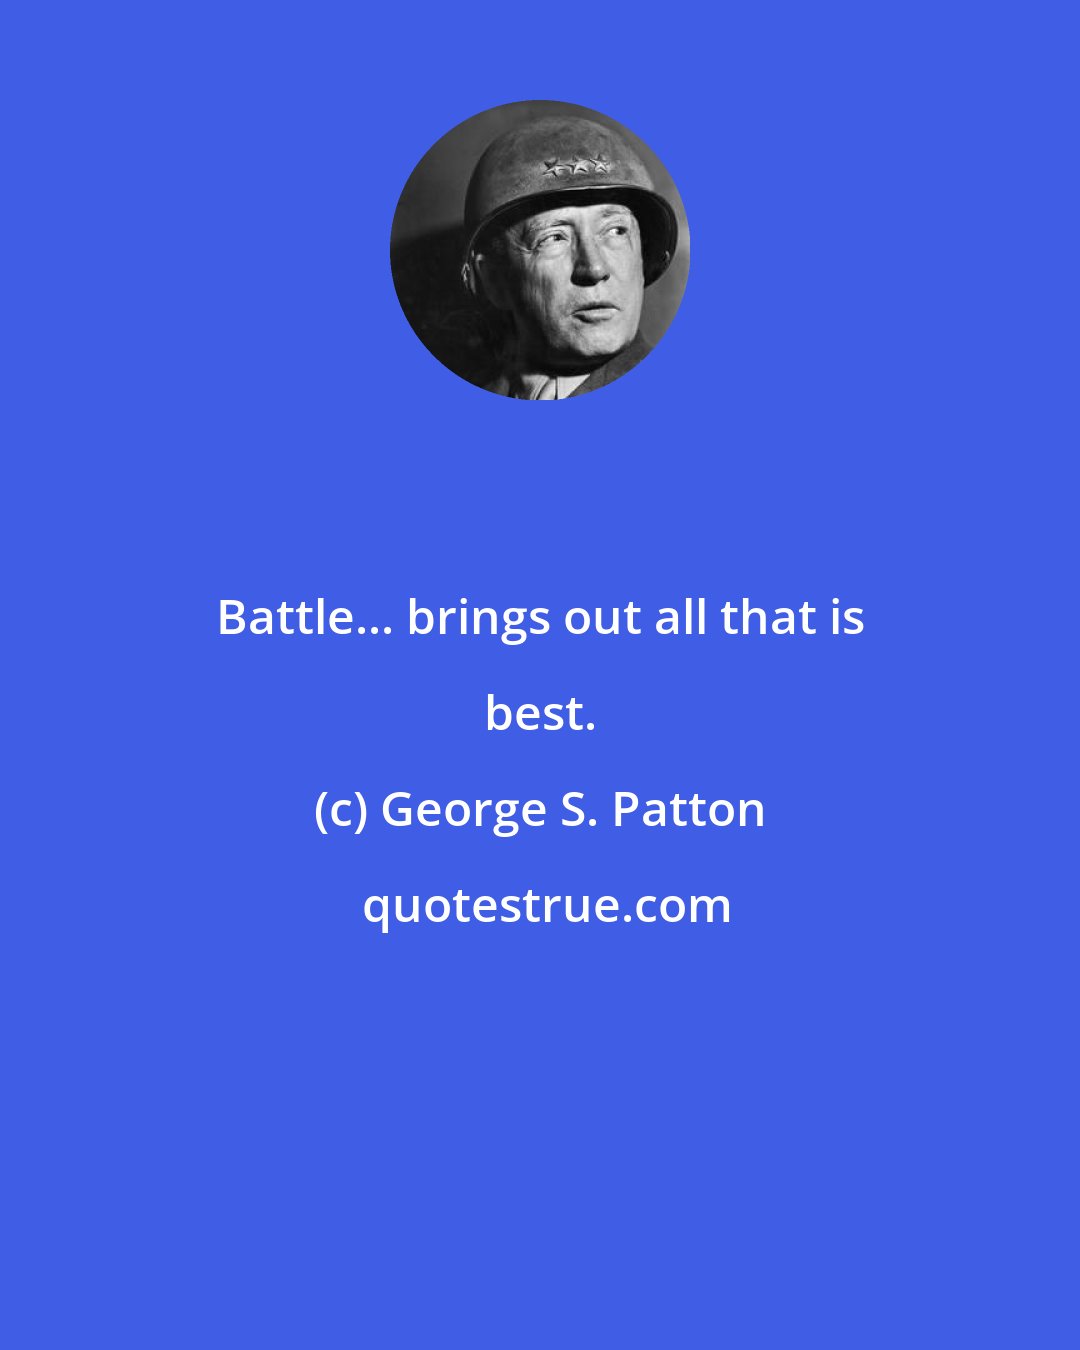 George S. Patton: Battle... brings out all that is best.